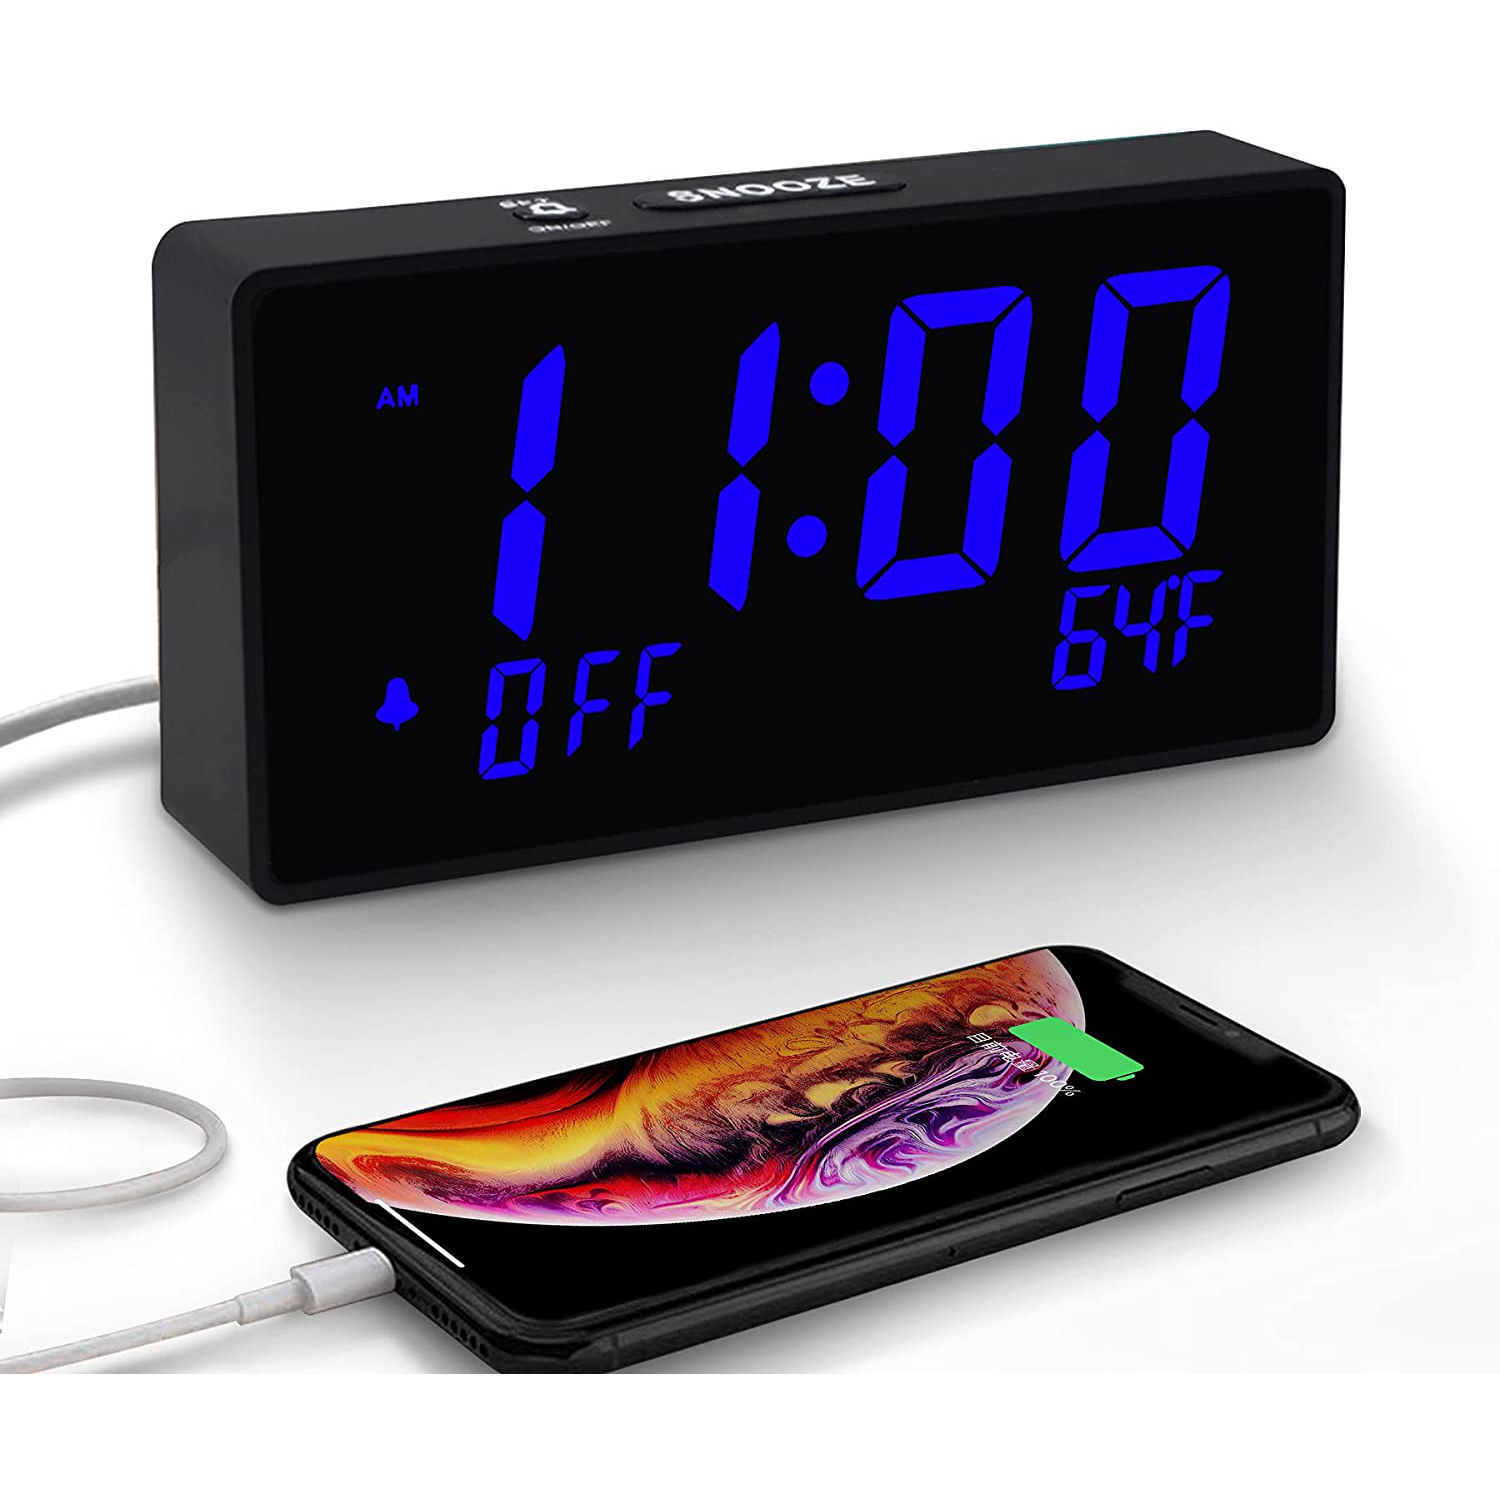 Compact Digital Alarm Clock with USB Port for Charging